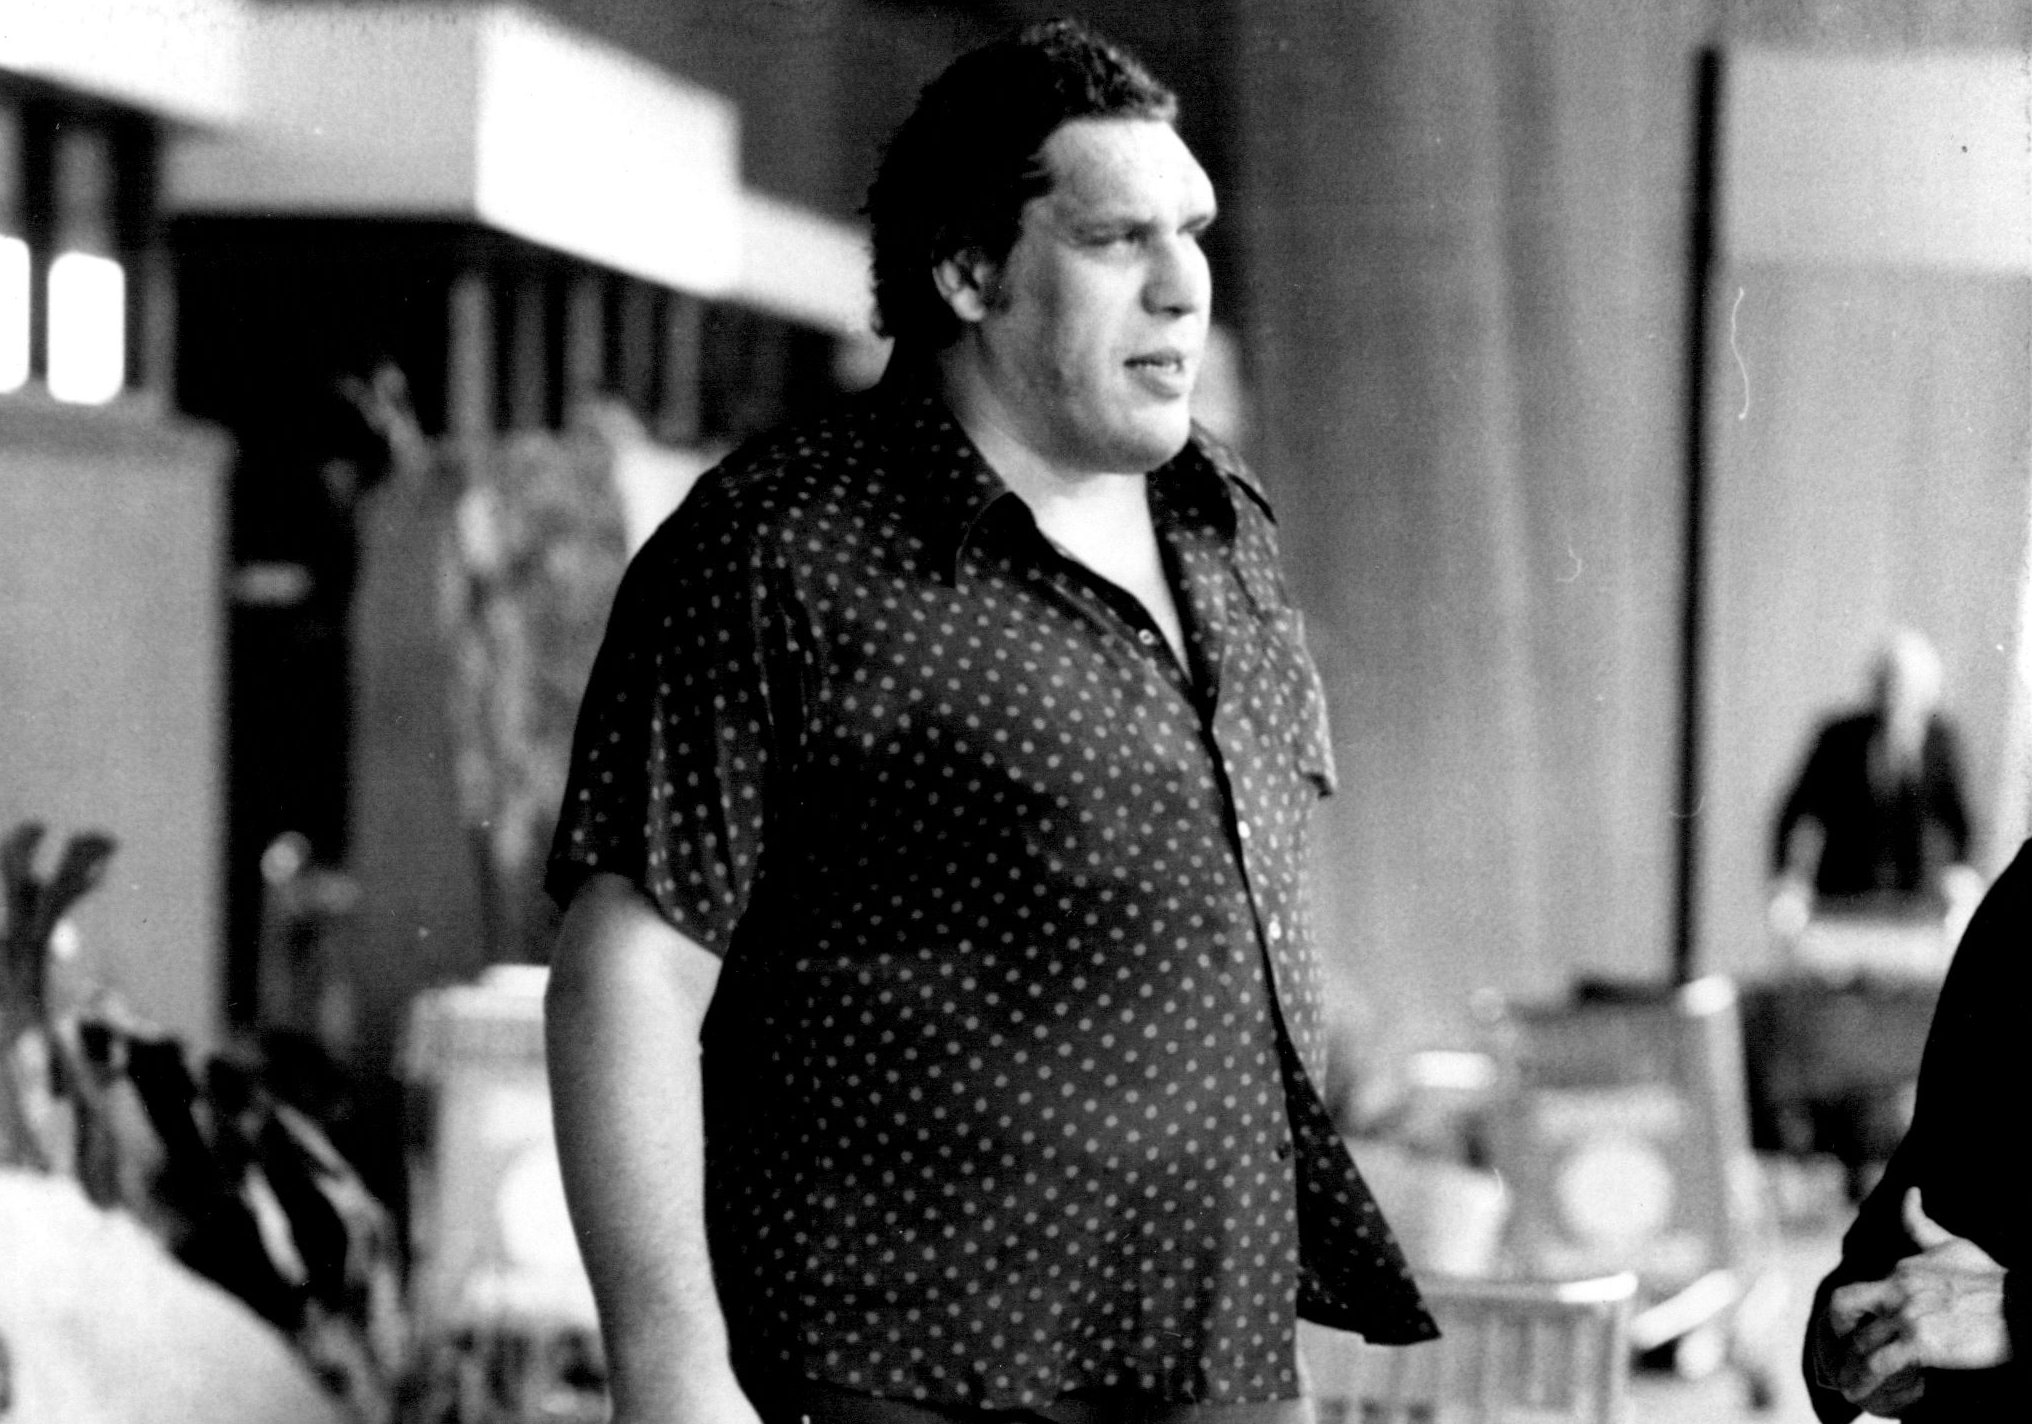 File:Andre the Giant.jpg - Wikipedia